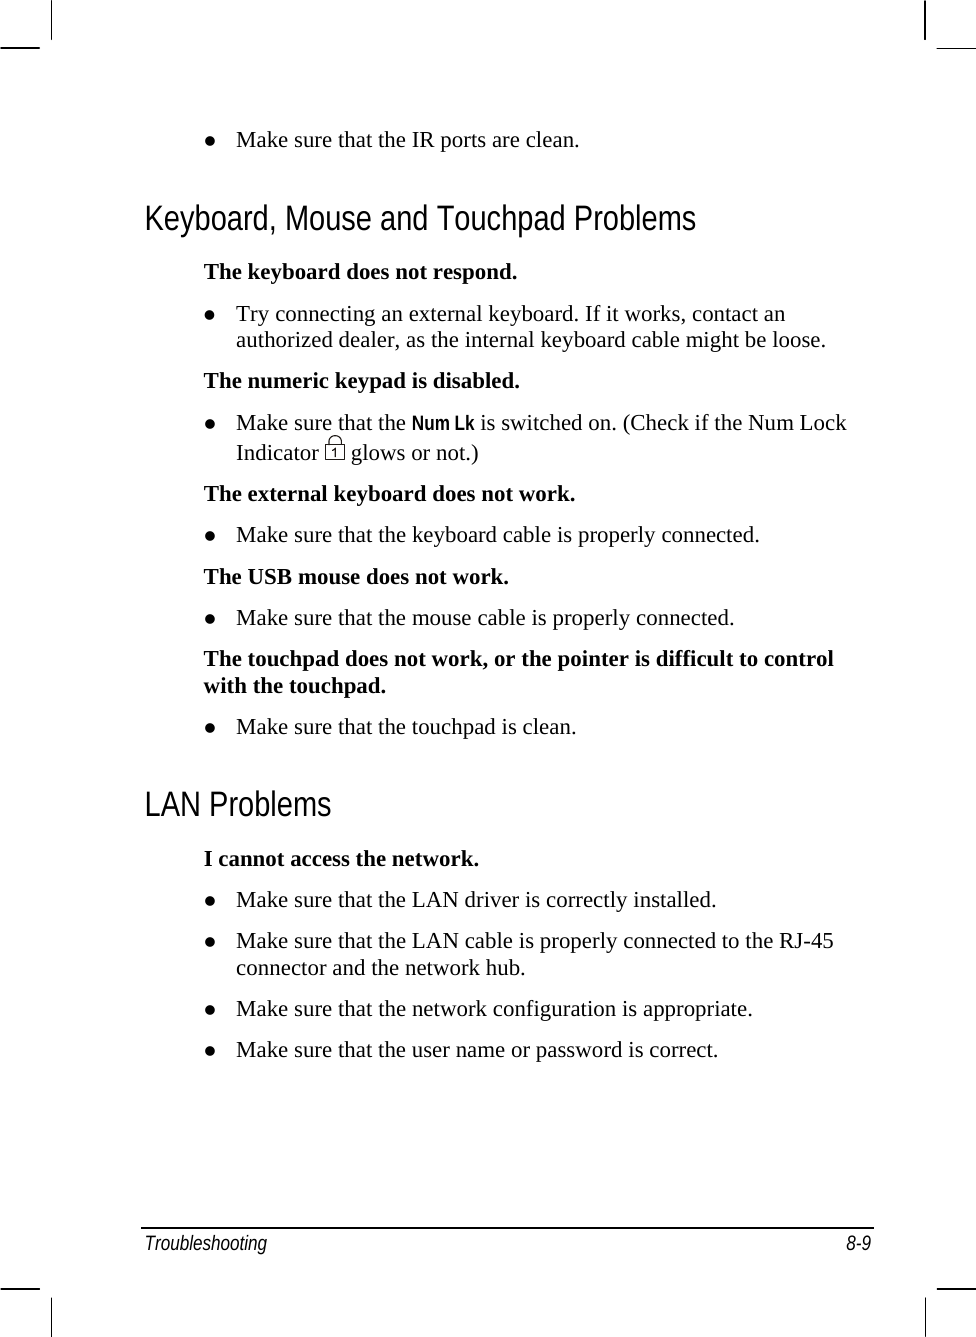  z Make sure that the IR ports are clean. Keyboard, Mouse and Touchpad Problems The keyboard does not respond. z Try connecting an external keyboard. If it works, contact an authorized dealer, as the internal keyboard cable might be loose. The numeric keypad is disabled. z Make sure that the Num Lk is switched on. (Check if the Num Lock Indicator   glows or not.) The external keyboard does not work. z Make sure that the keyboard cable is properly connected. The USB mouse does not work. z Make sure that the mouse cable is properly connected. The touchpad does not work, or the pointer is difficult to control with the touchpad. z Make sure that the touchpad is clean. LAN Problems I cannot access the network. z Make sure that the LAN driver is correctly installed. z Make sure that the LAN cable is properly connected to the RJ-45 connector and the network hub. z Make sure that the network configuration is appropriate. z Make sure that the user name or password is correct. Troubleshooting 8-9 